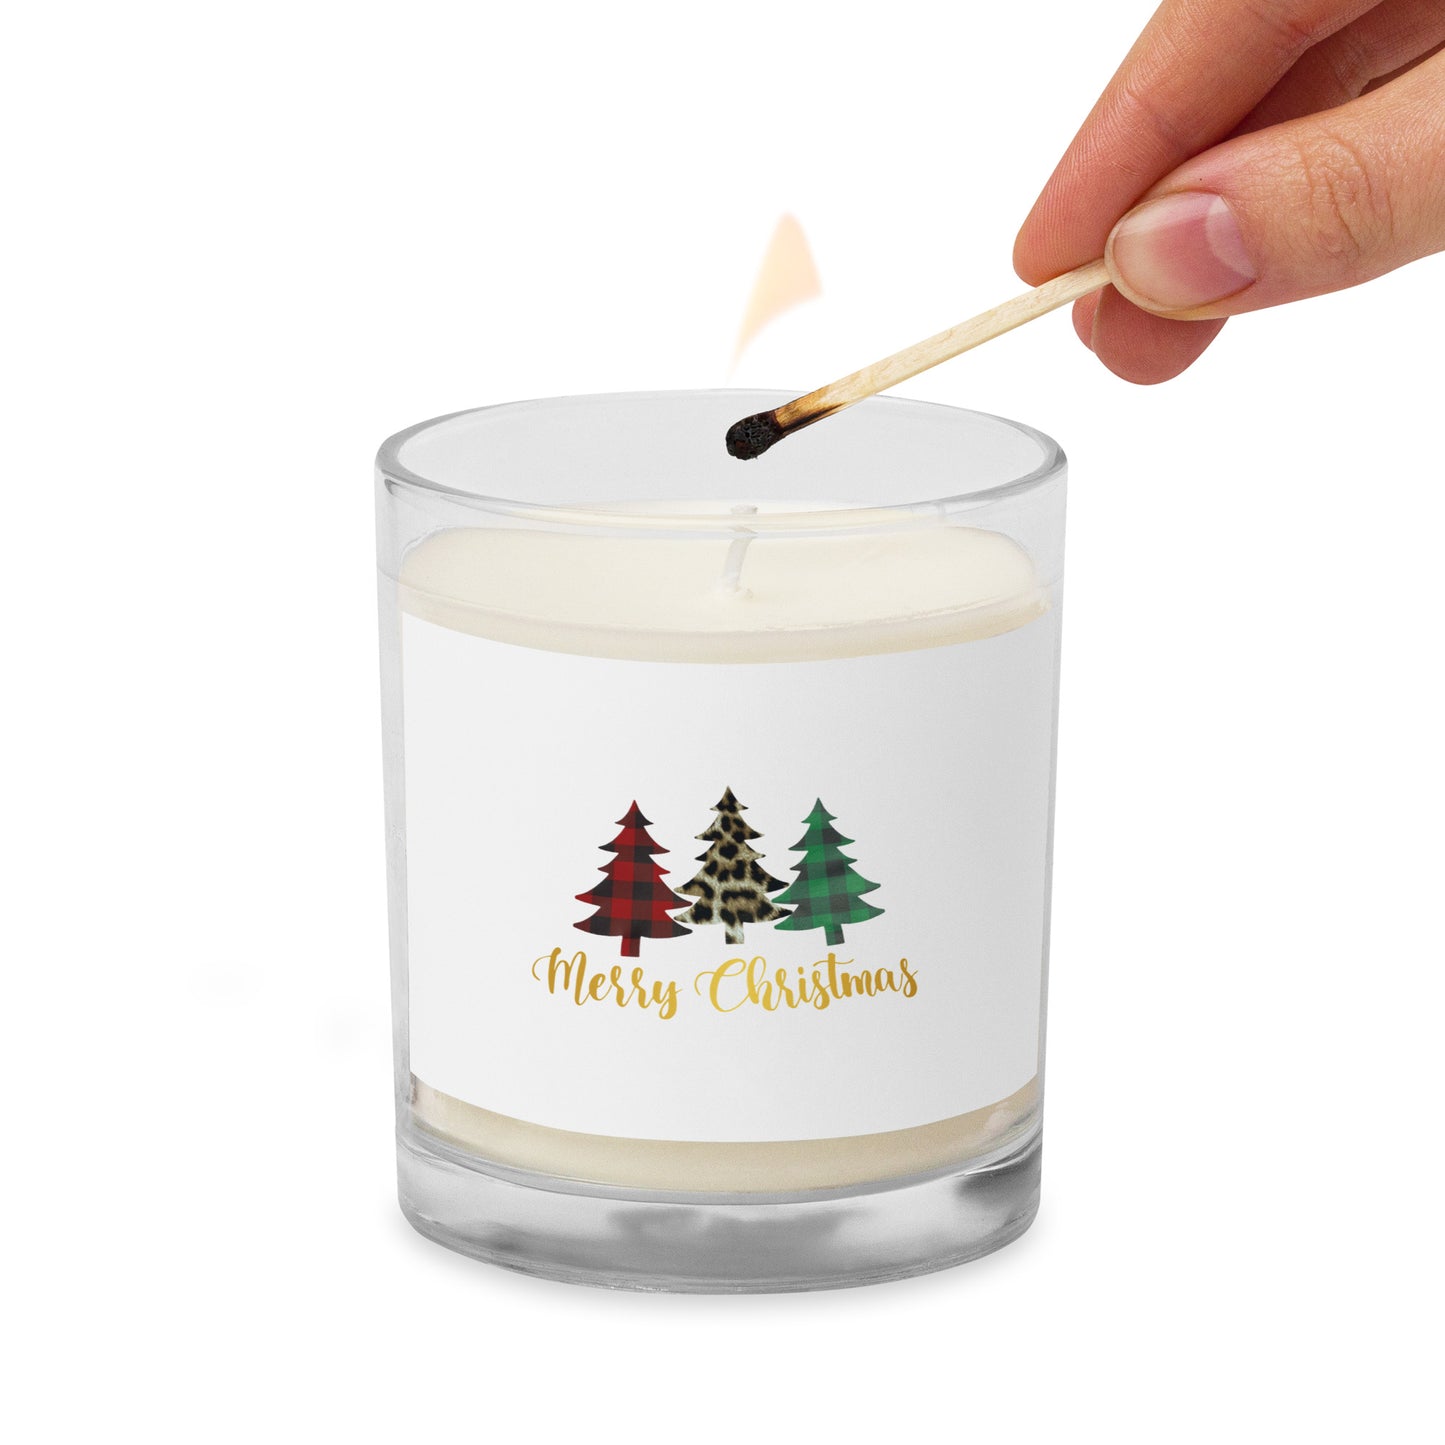 Merry Christmas Glass Jar Soy Wax Candle